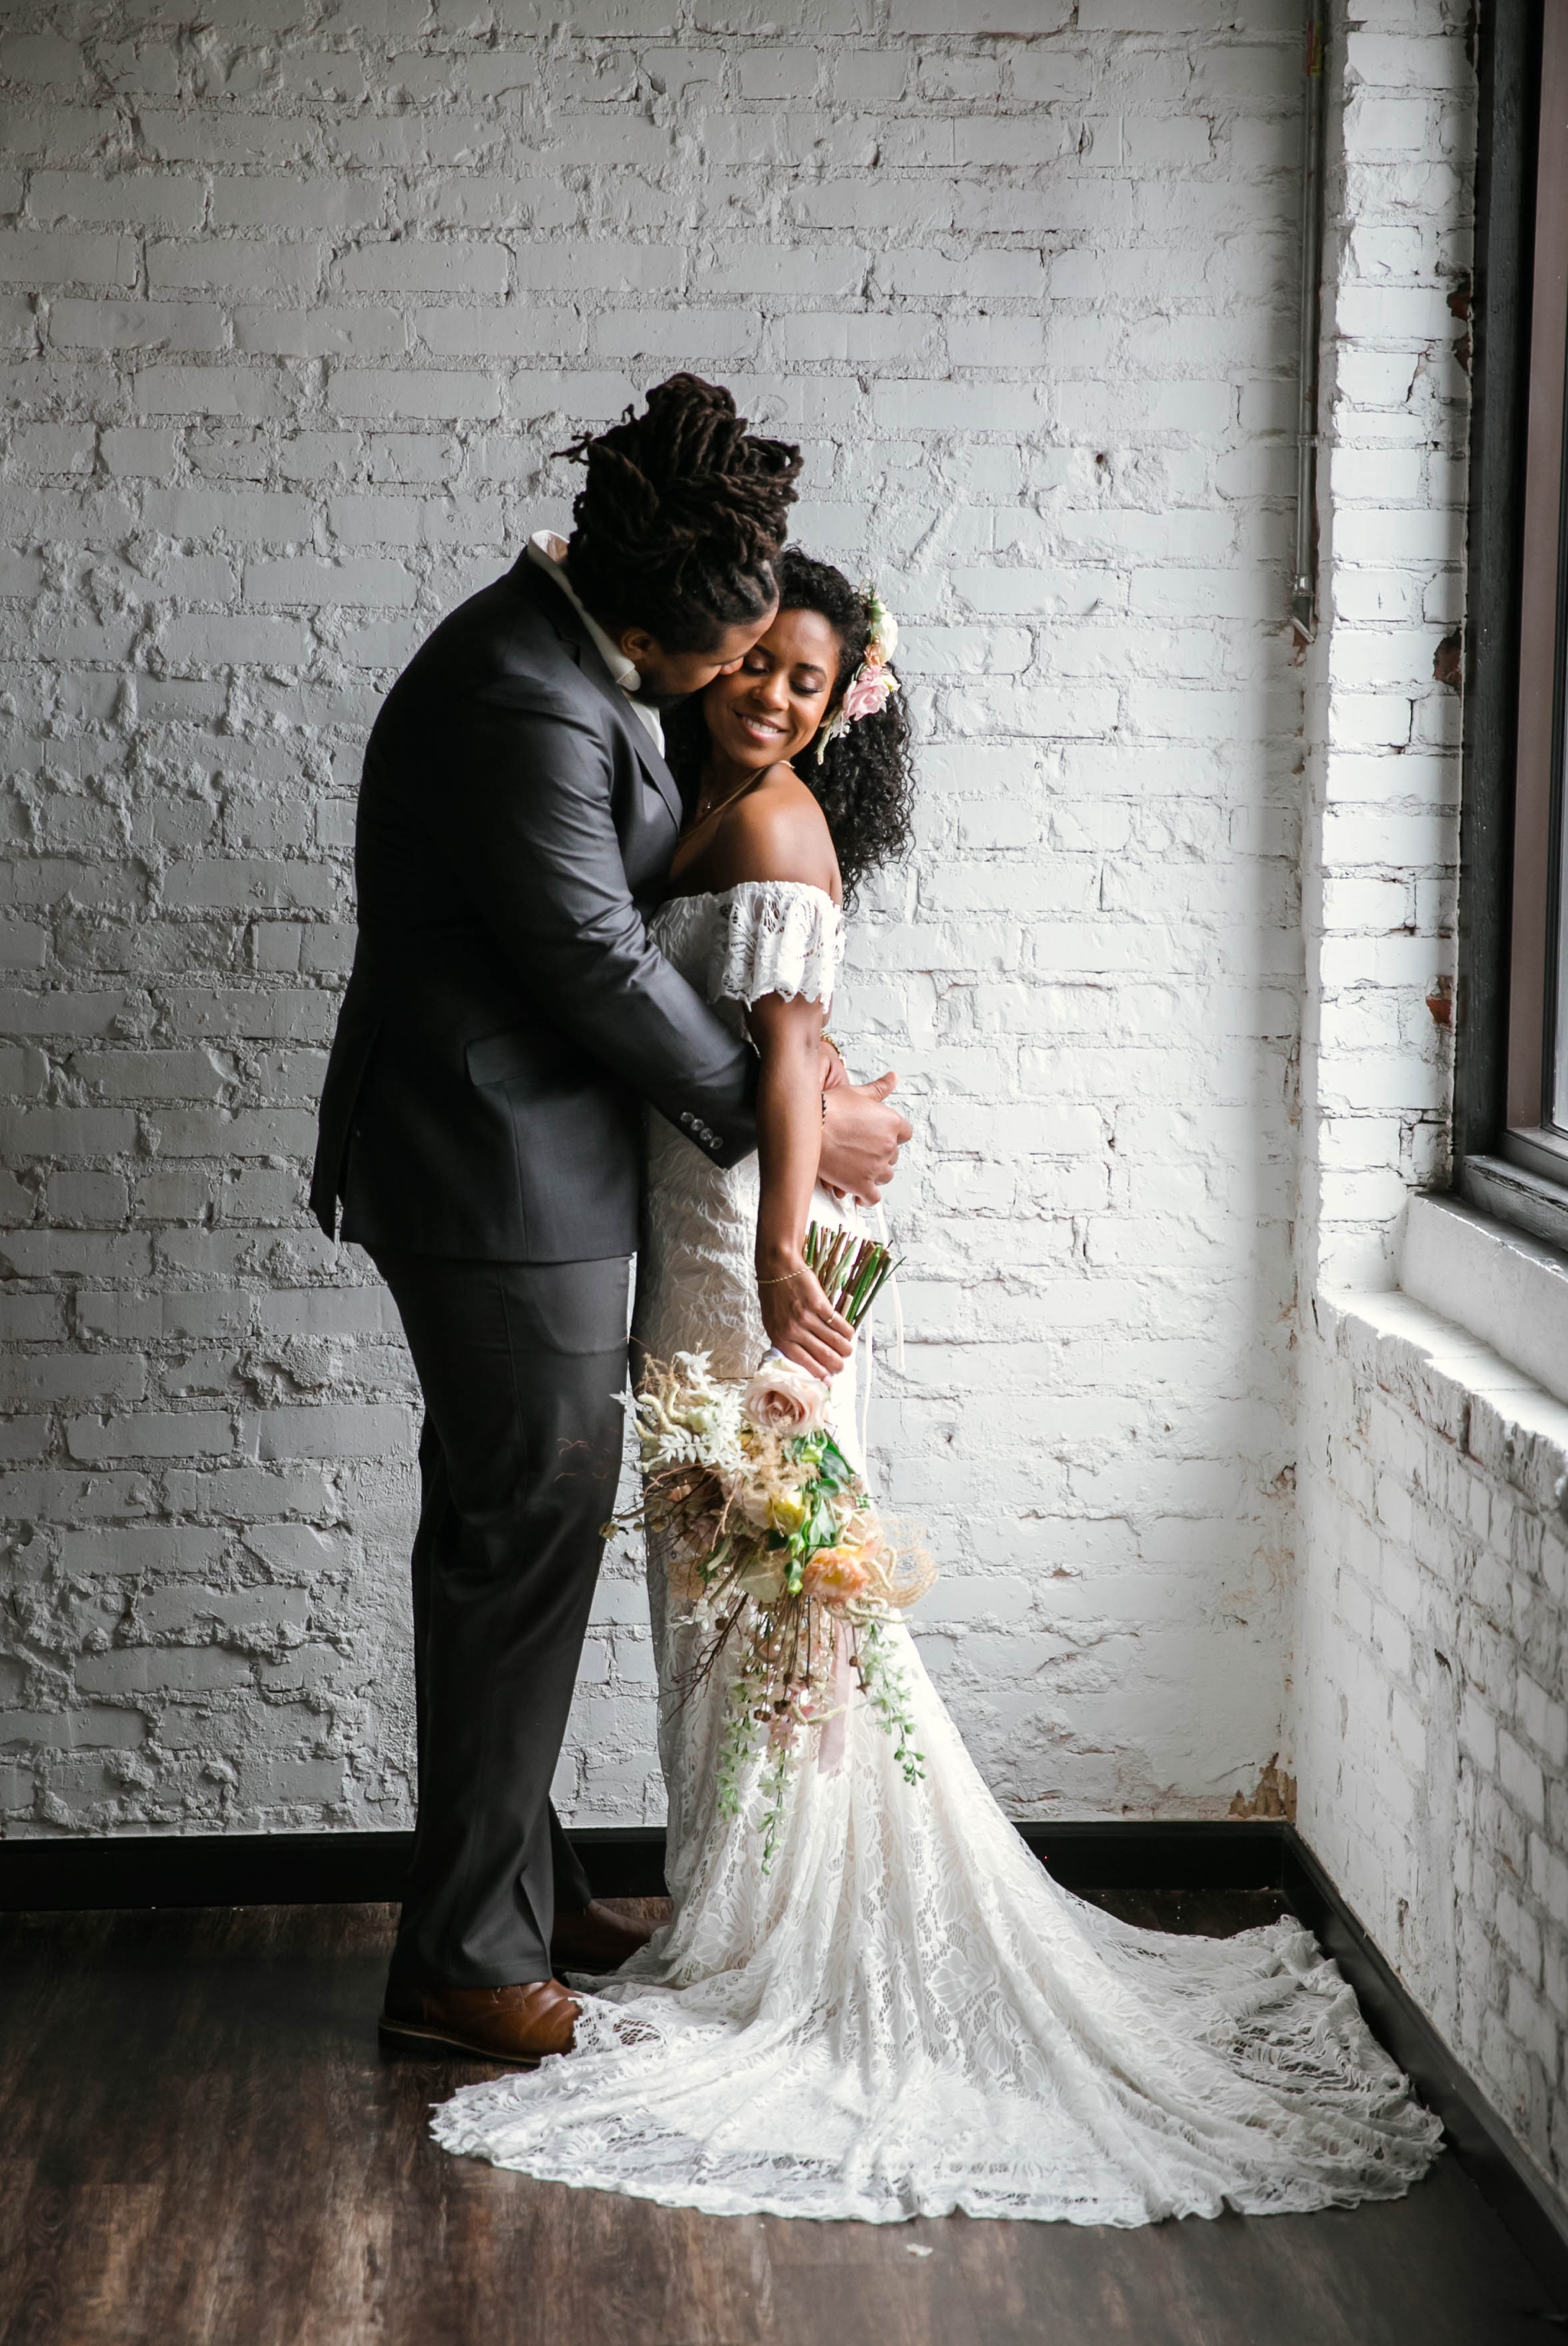  Indoor Wedding Portrait with natural light by a Window of an African American Black couple - Groom kisses the bride on the cheek - boho tropical inspiration by Honolulu, Oahu, Hawaii Wedding Photographer 